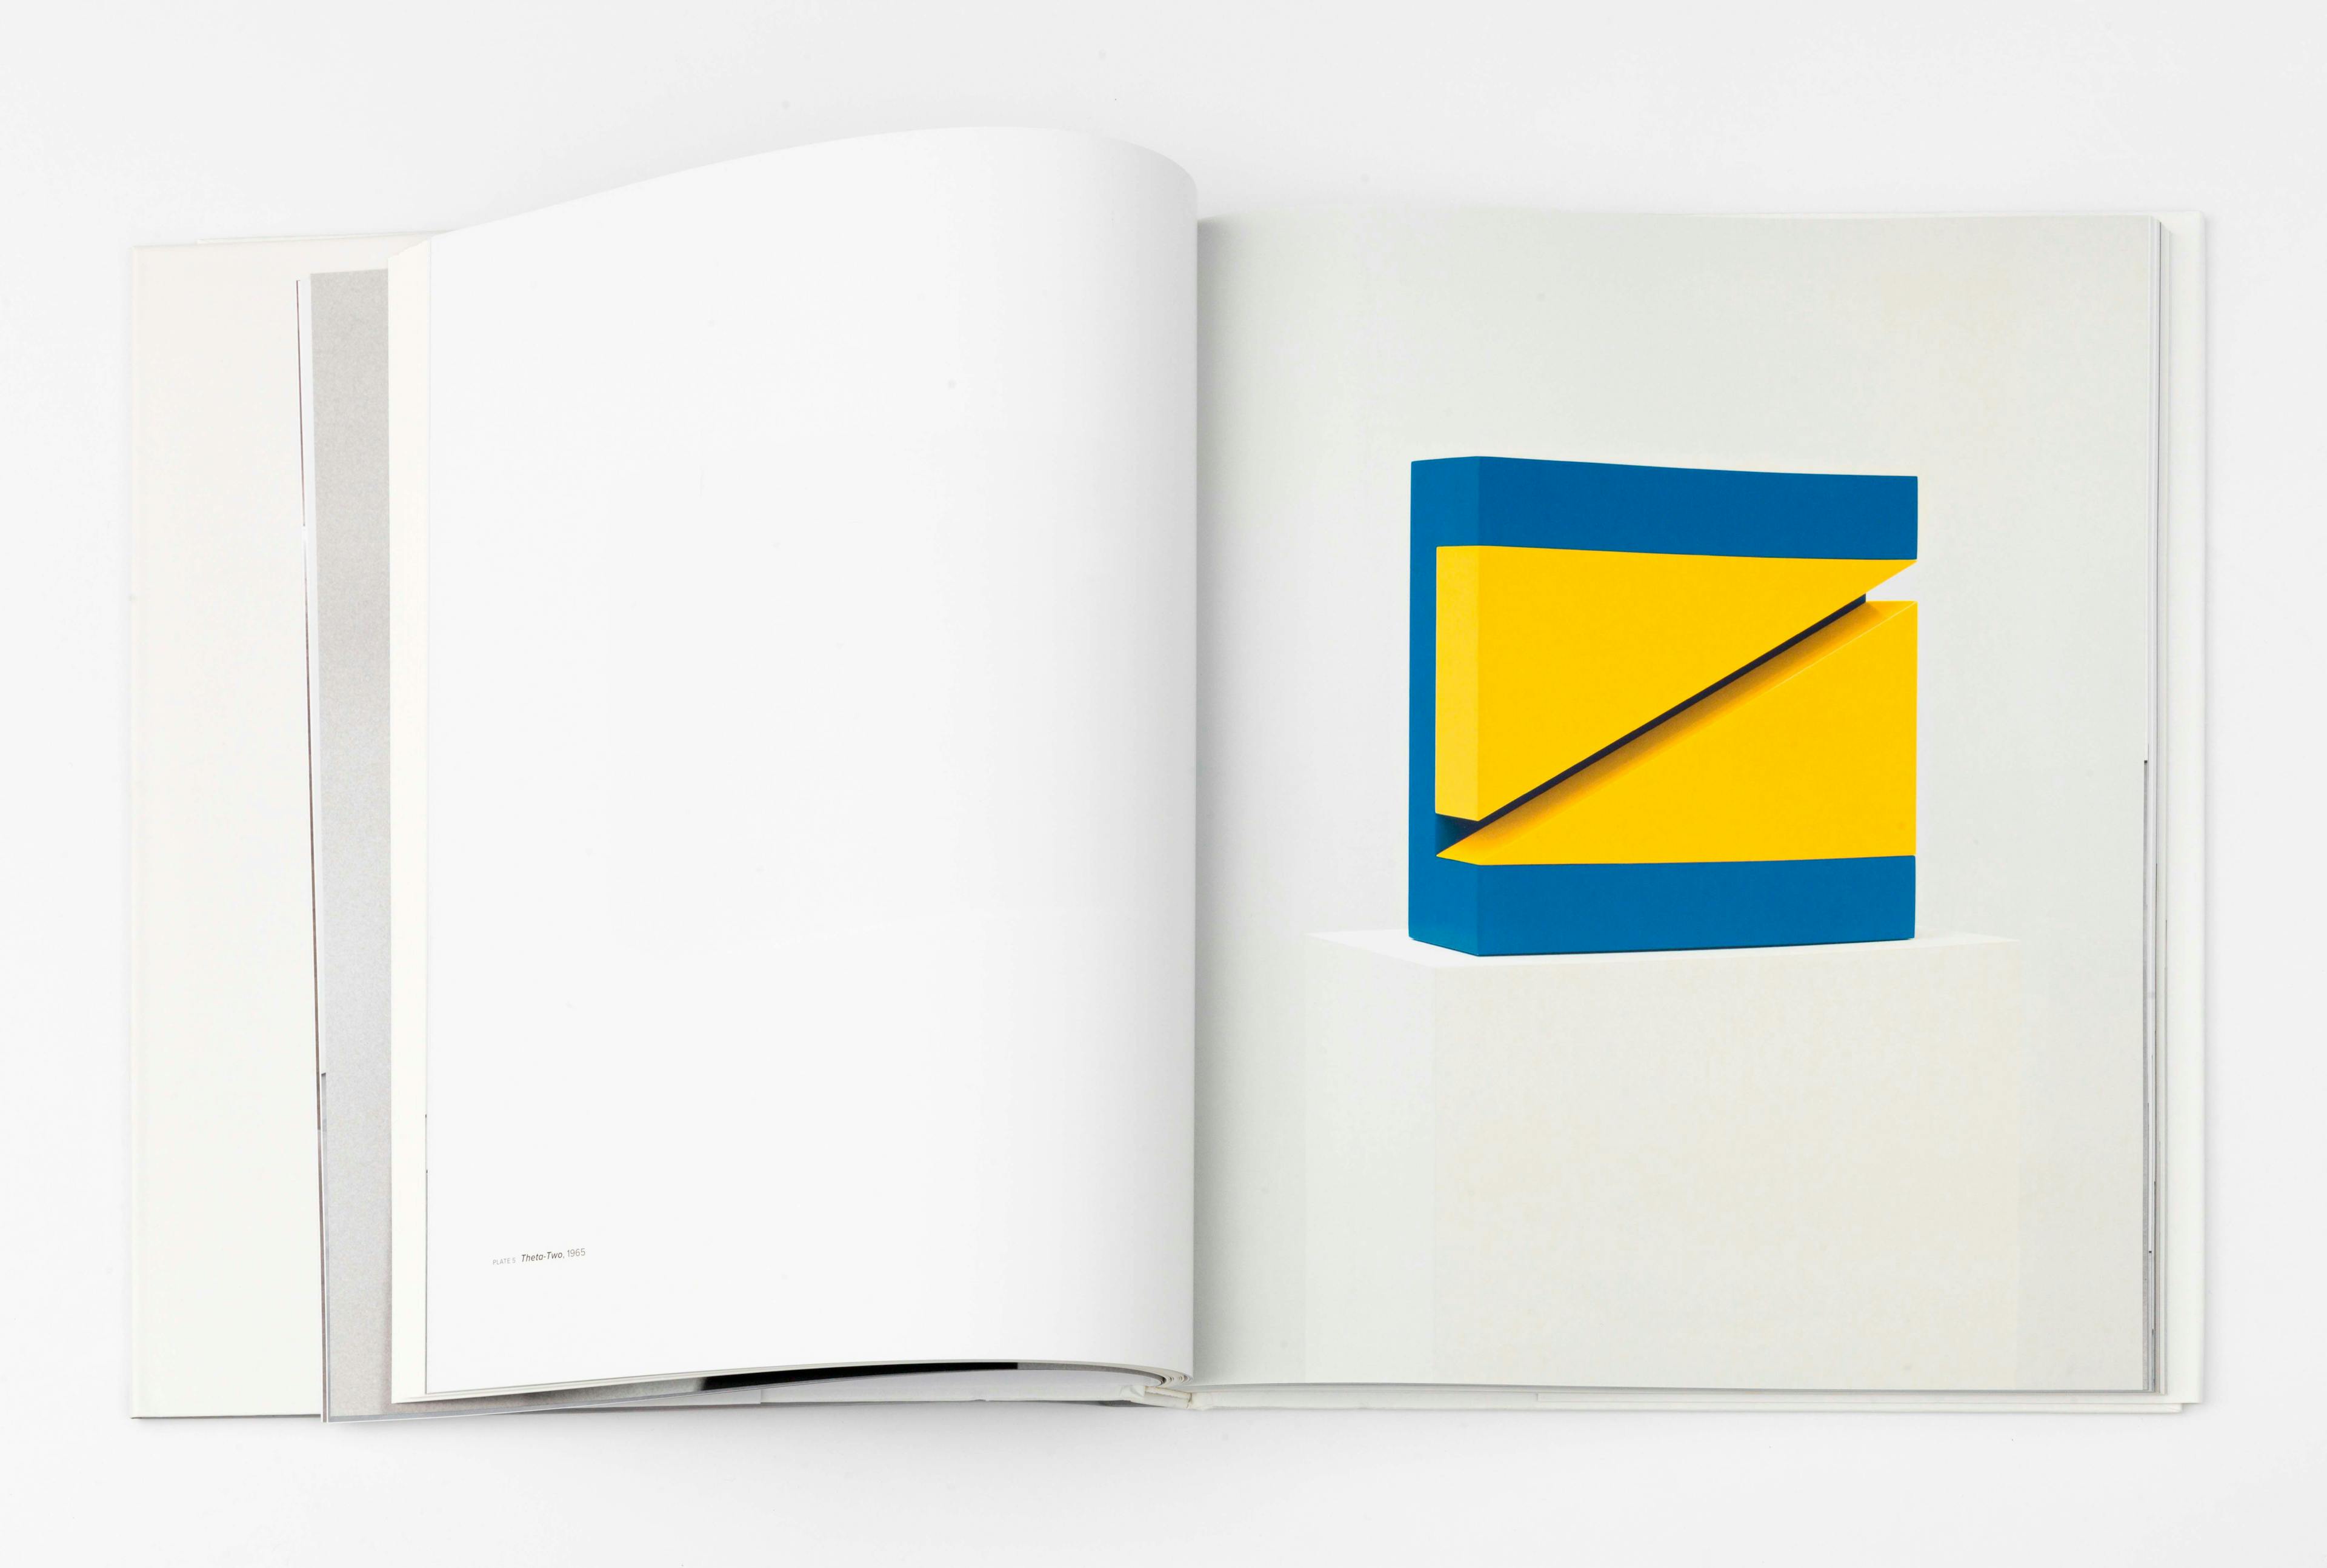 A spread from John McCracken: Works from 1963-2011, published by David Zwirner Books / Radius Books, 2014.